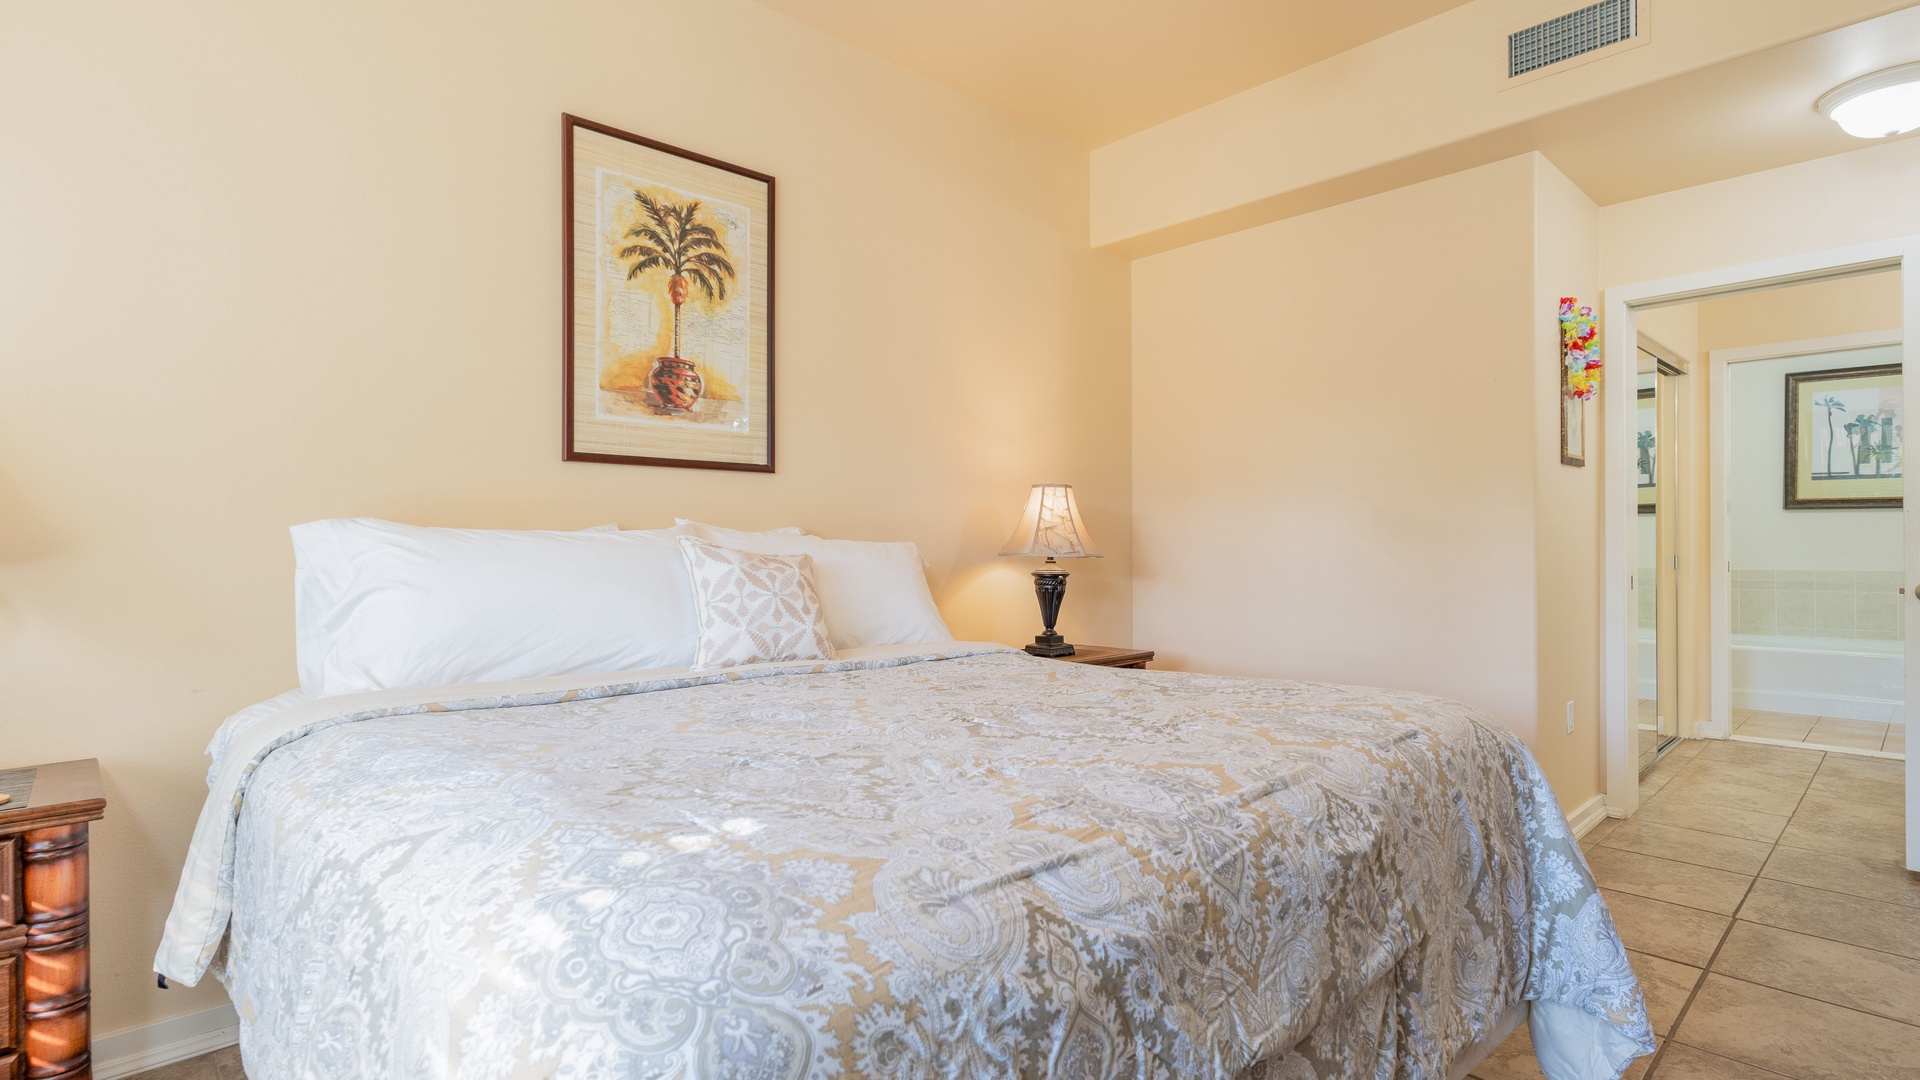 Kapolei Vacation Rentals, Kai Lani 8B - Wake up refreshed to views of island skies in this primary bedroom.